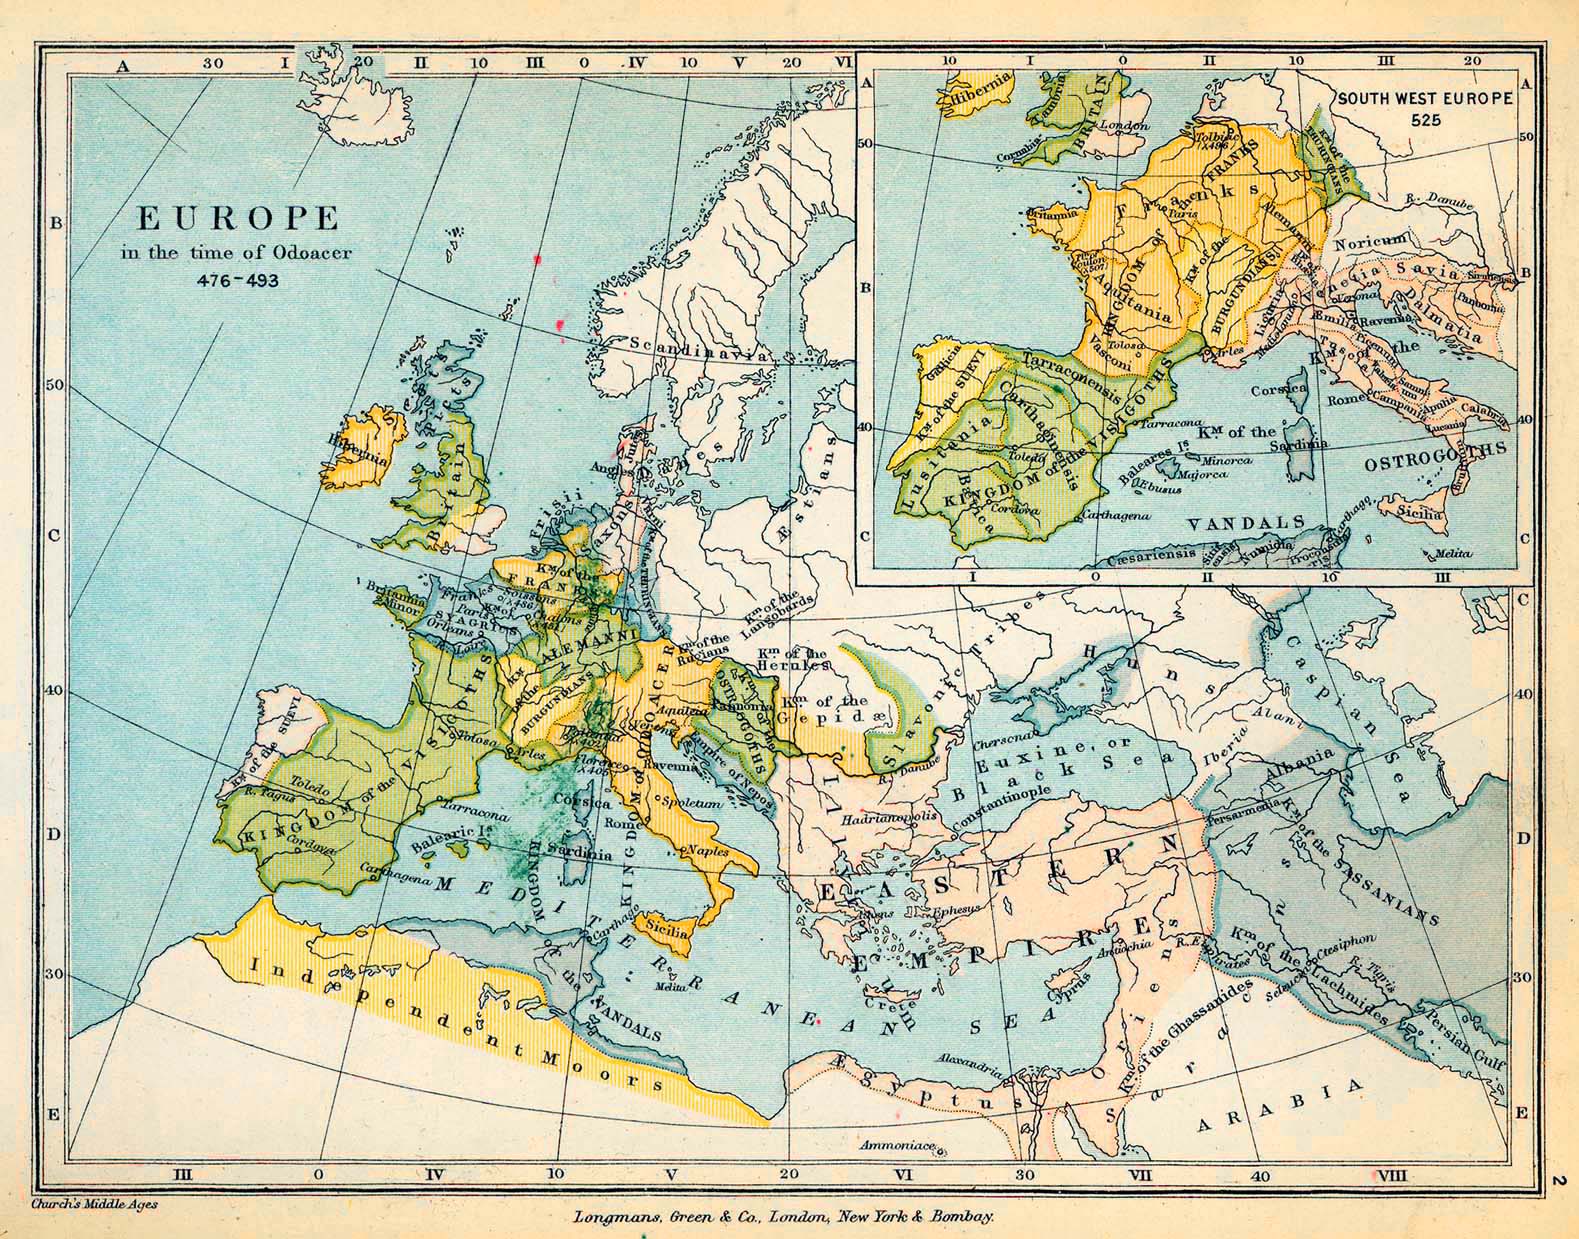 Map of Europe in the time of Odoacer 476-493